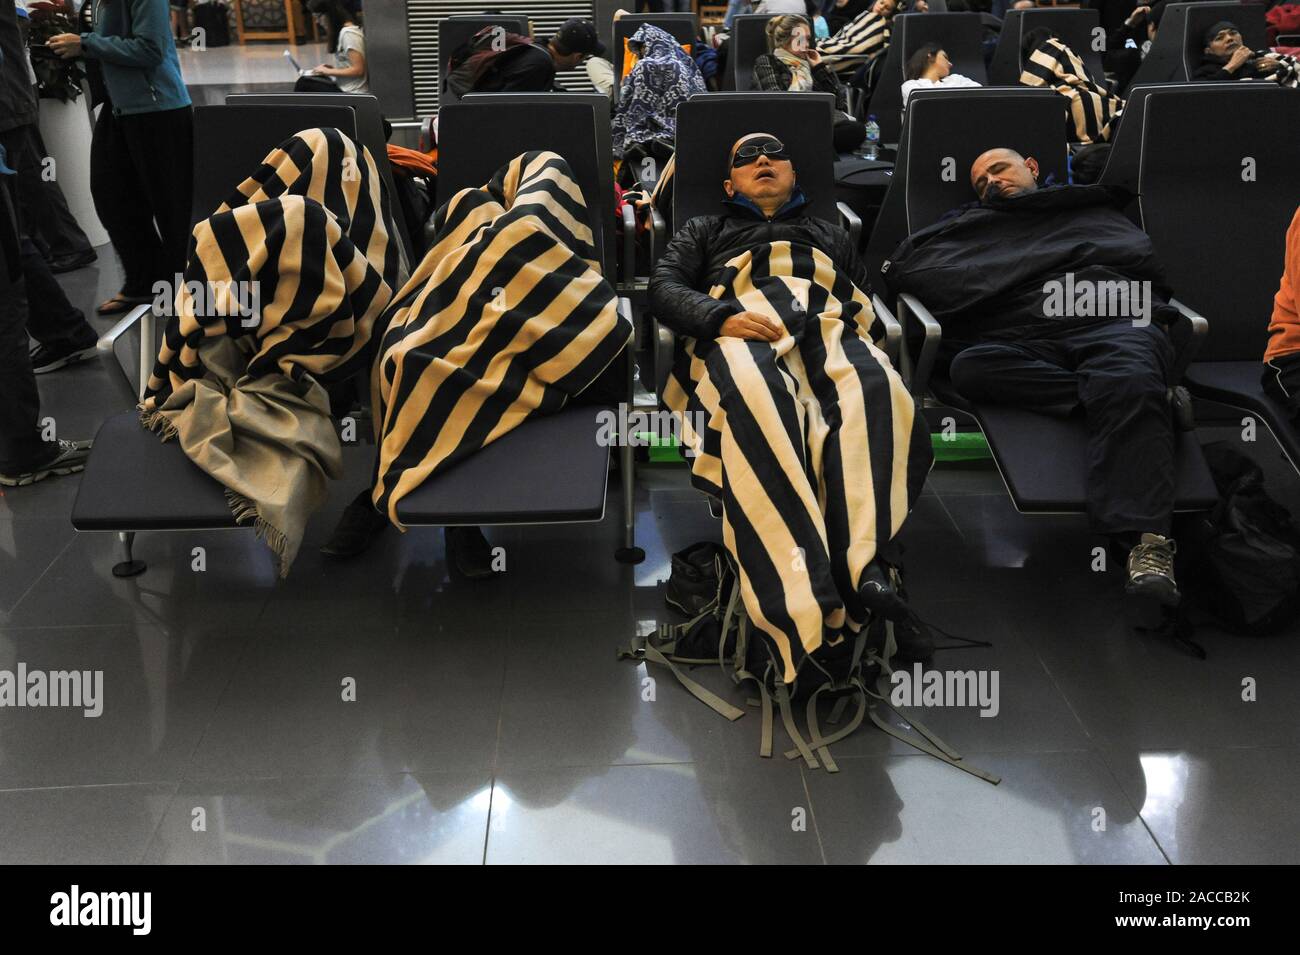 04.01.2014, Abu Dhabi, United Arab Emirates - Sleeping passengers wait for their connecting flights in the transit hall during a stopover. Stock Photo